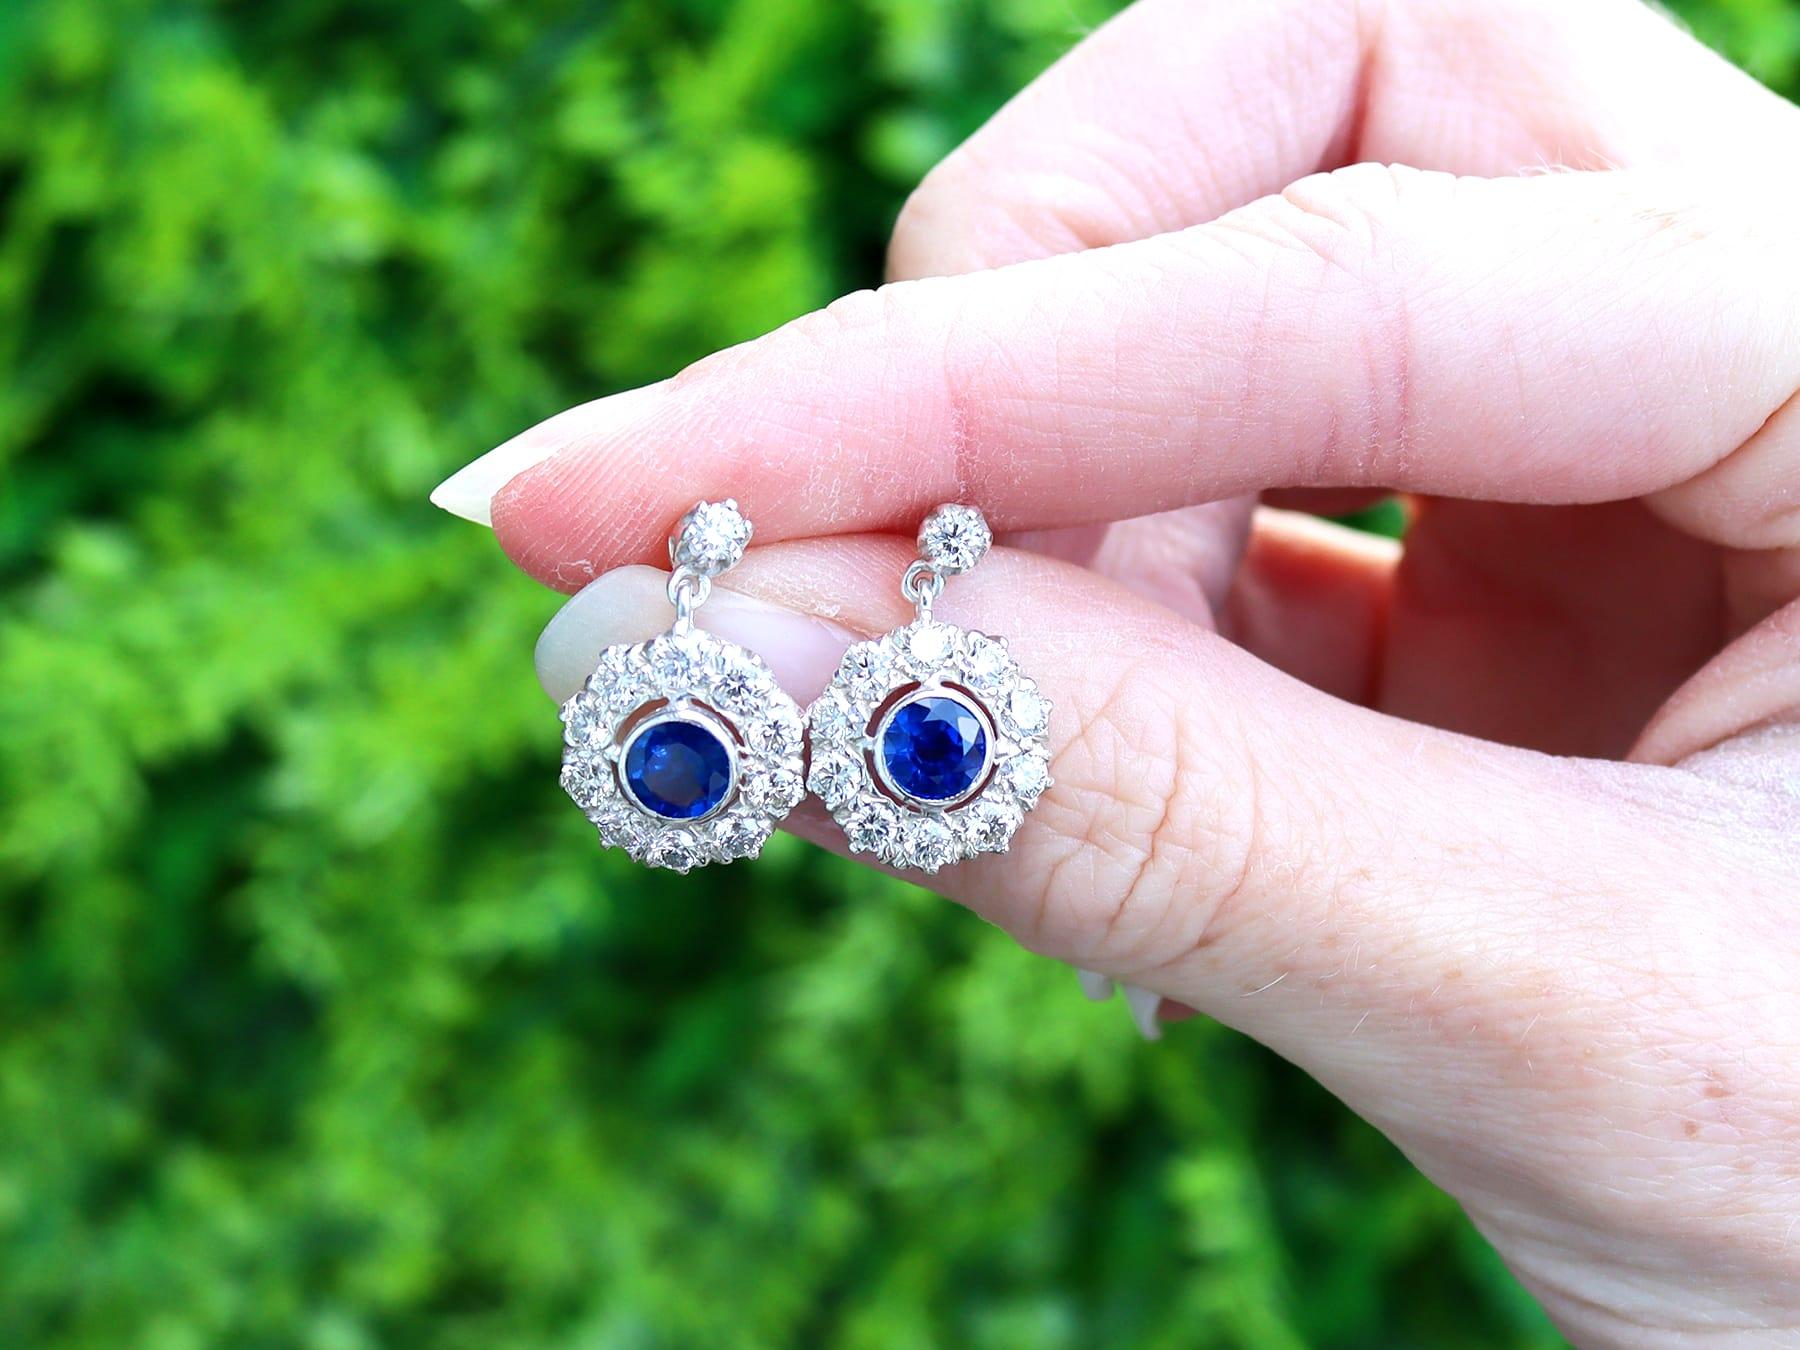 A stunning, fine and impressive pair of antique 1.00 carat blue sapphire and 1.98 carat diamond, 18 karat yellow gold, silver set drop earrings; part of our antique sapphire jewellery and estate jewelry collections

These stunning, fine and